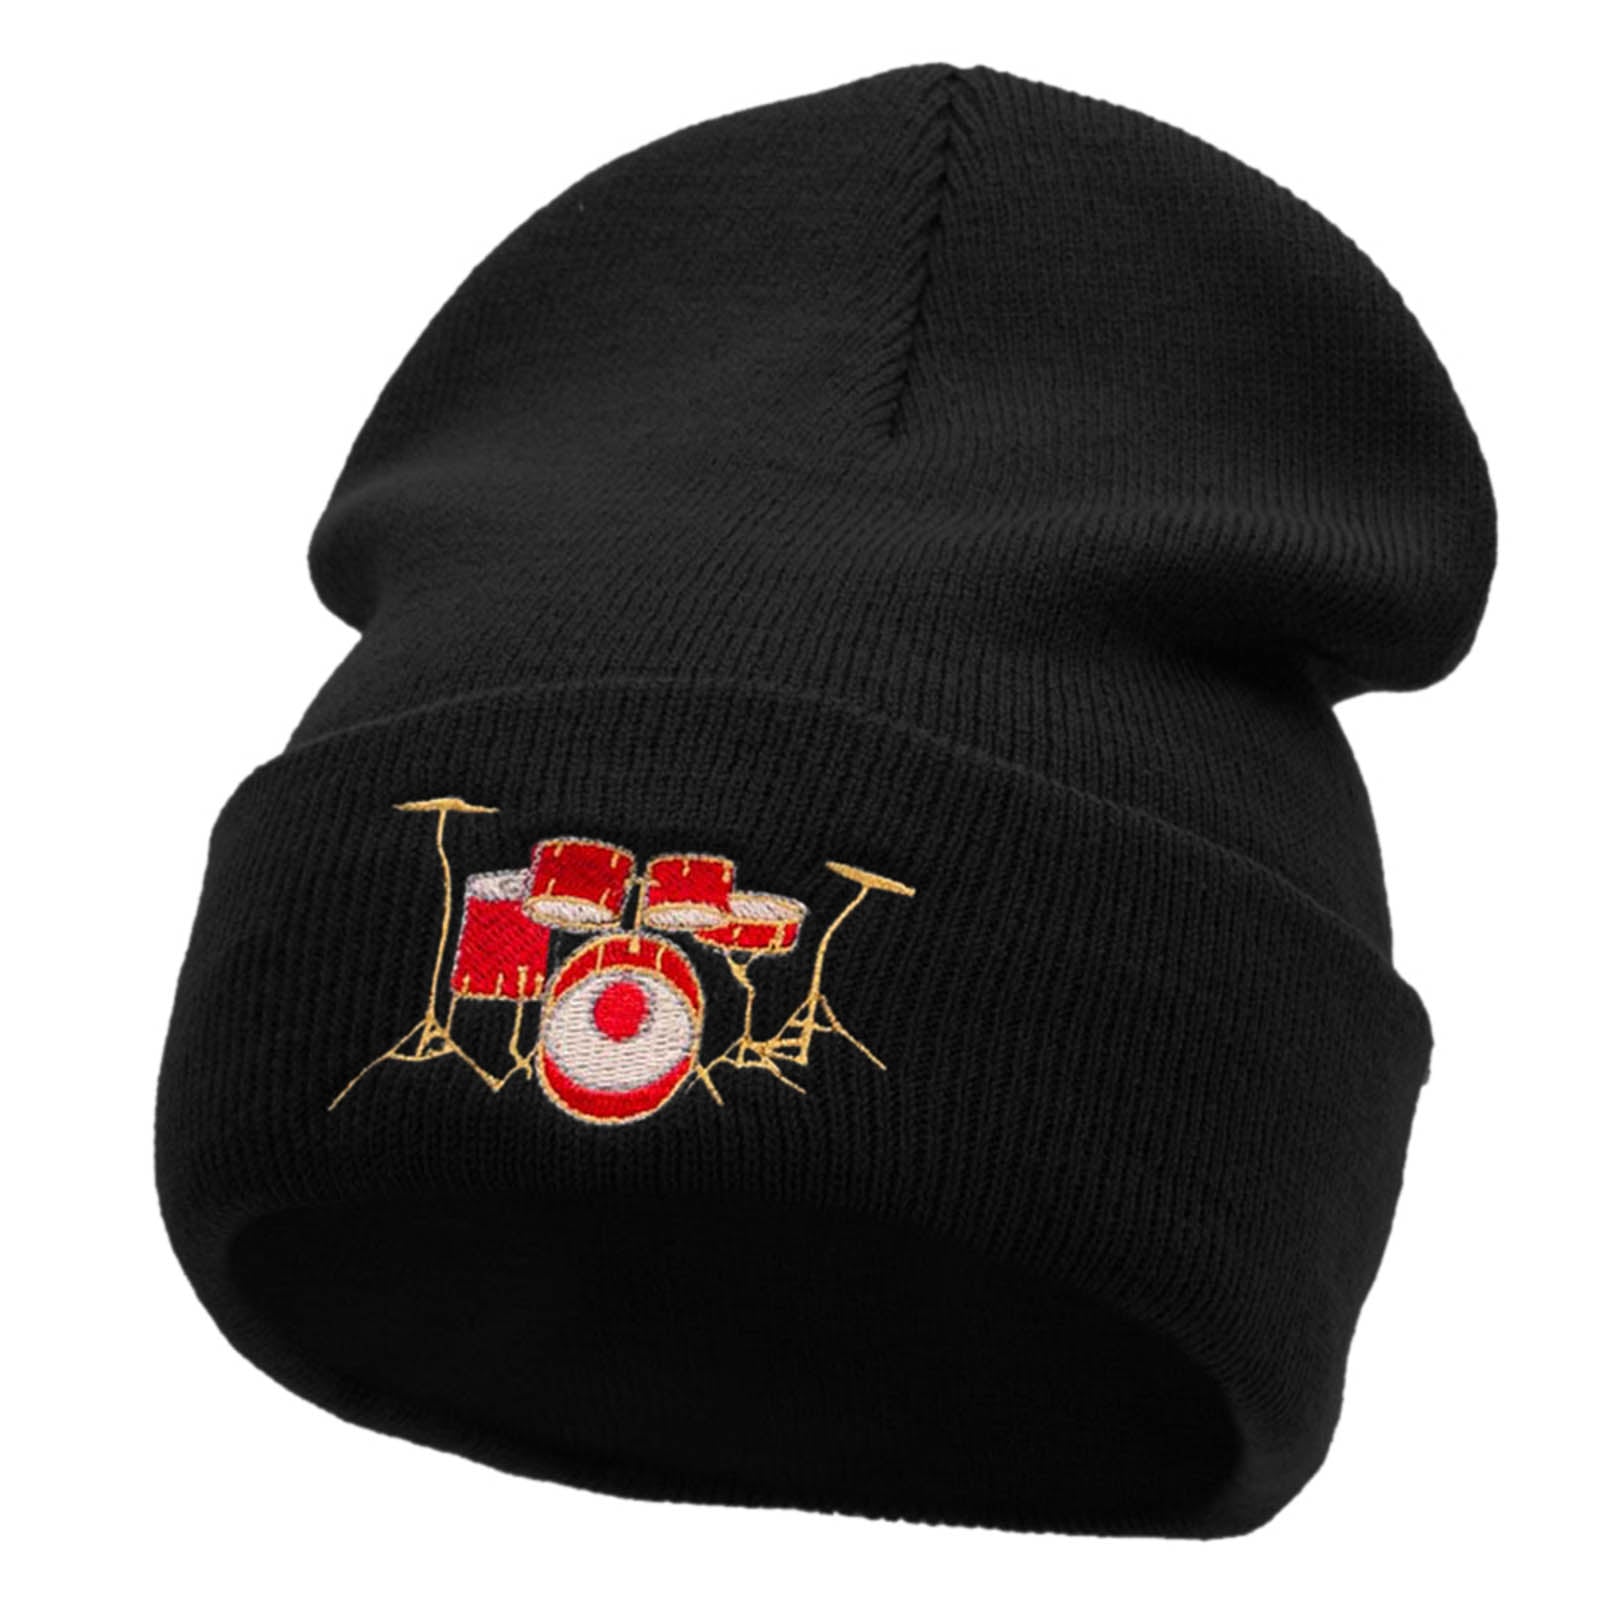 Drum Set Embroidered 12 Inch Long Knitted Beanie - Black OSFM